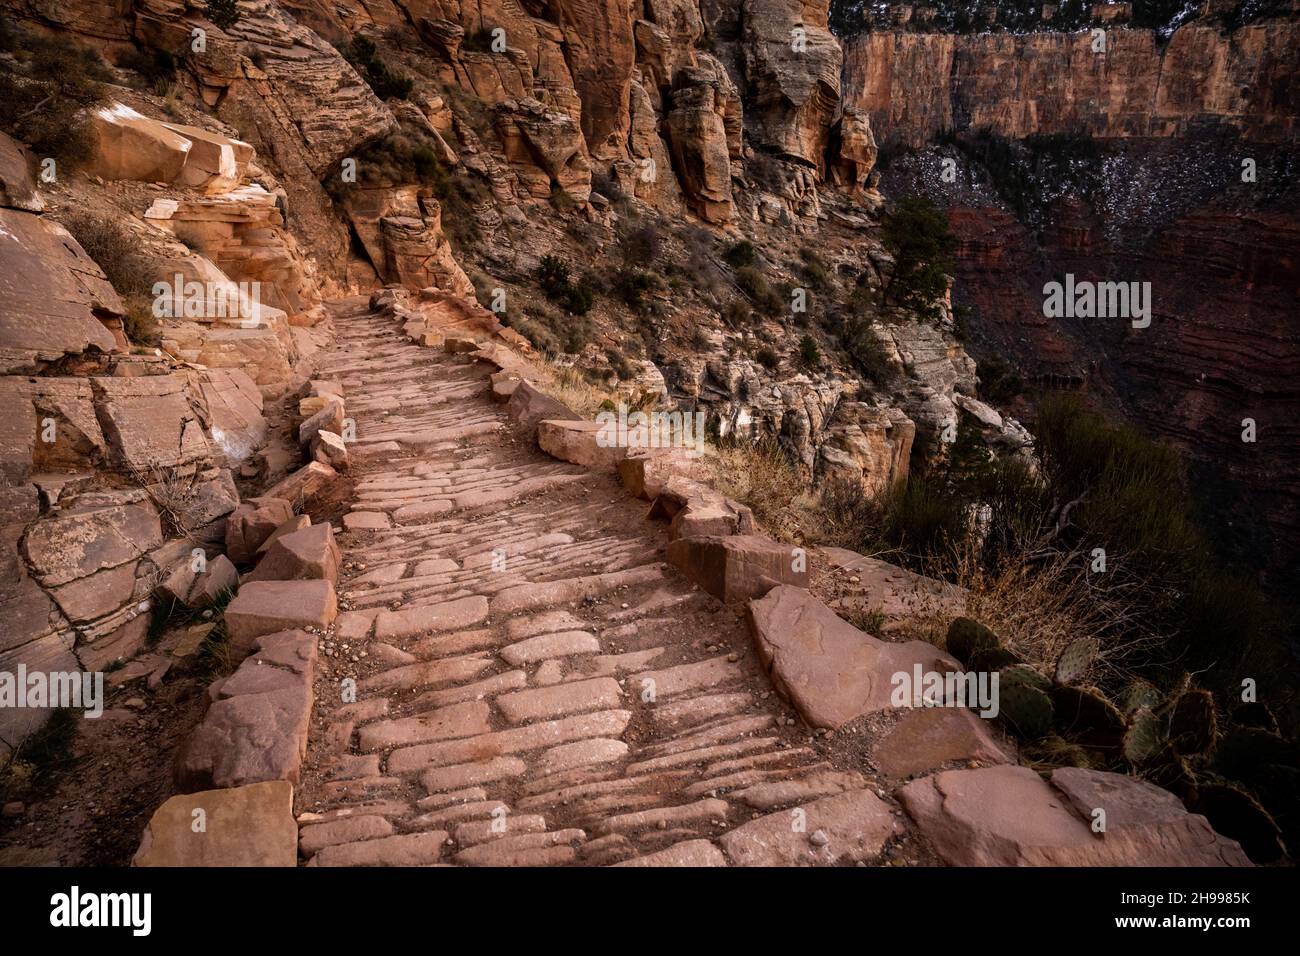 Highly Manicured Trail Of South Kaibab heading into the Grand Canyon Stock Photo